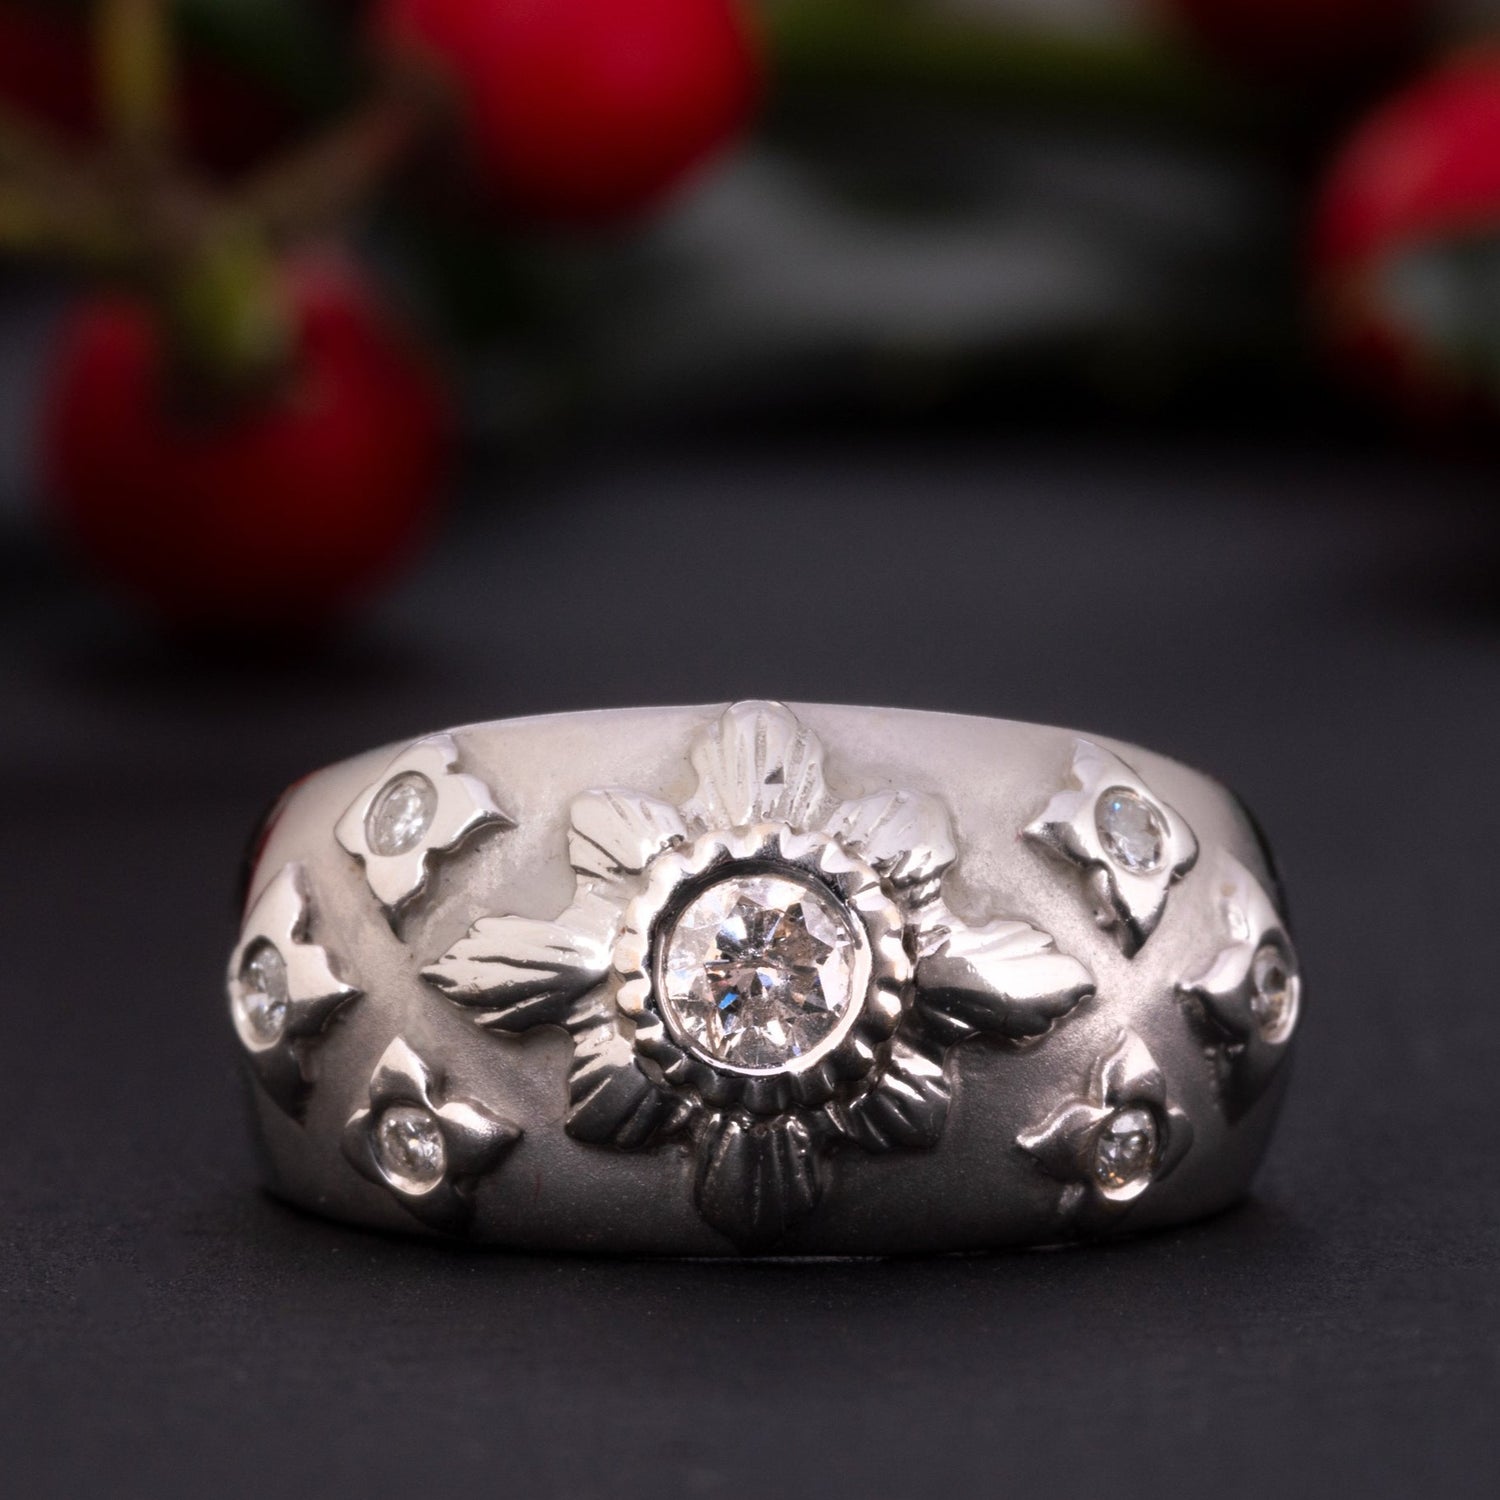 A white gold diamond starburst ring made of solid 18 ct gold and set with 0.35 ct worth of diamonds.  The shank of this celestial ring is rather wide and puffy, the front part is brushed and has a velvet-like gold texture. The celestial centerpiece is set with 7 diamonds.  The central diamond of 0.2 ct is set in an elevated 'star' setting and is surrounded by six smaller stones.